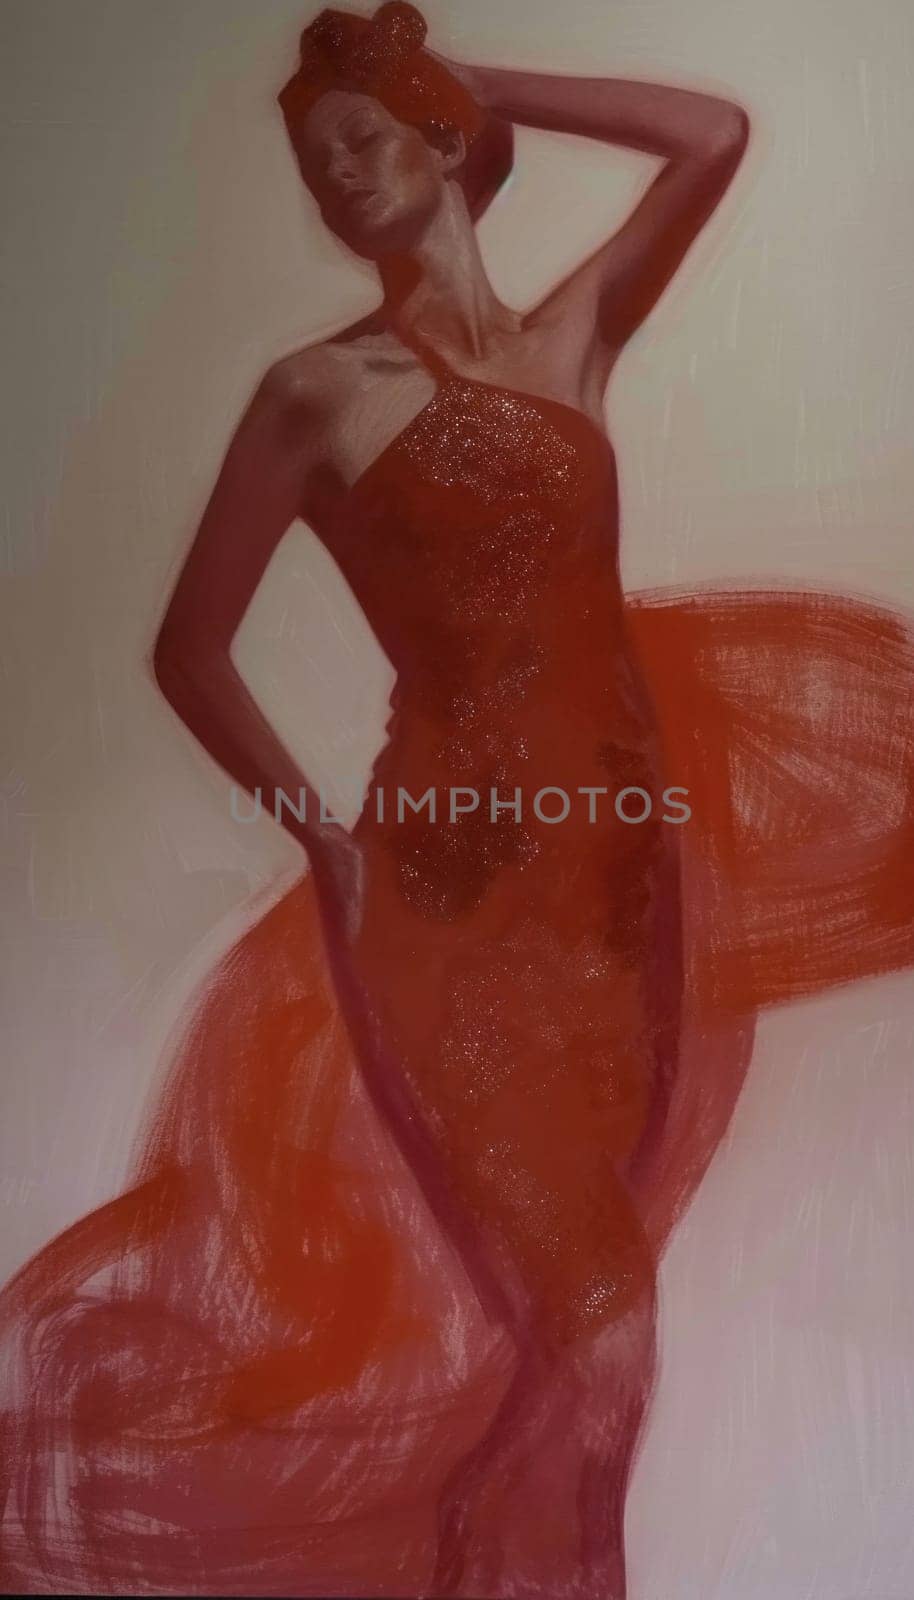 Woman in red dress with arms raised in celebration of beauty and fashion, artistic expression of joy and elegance